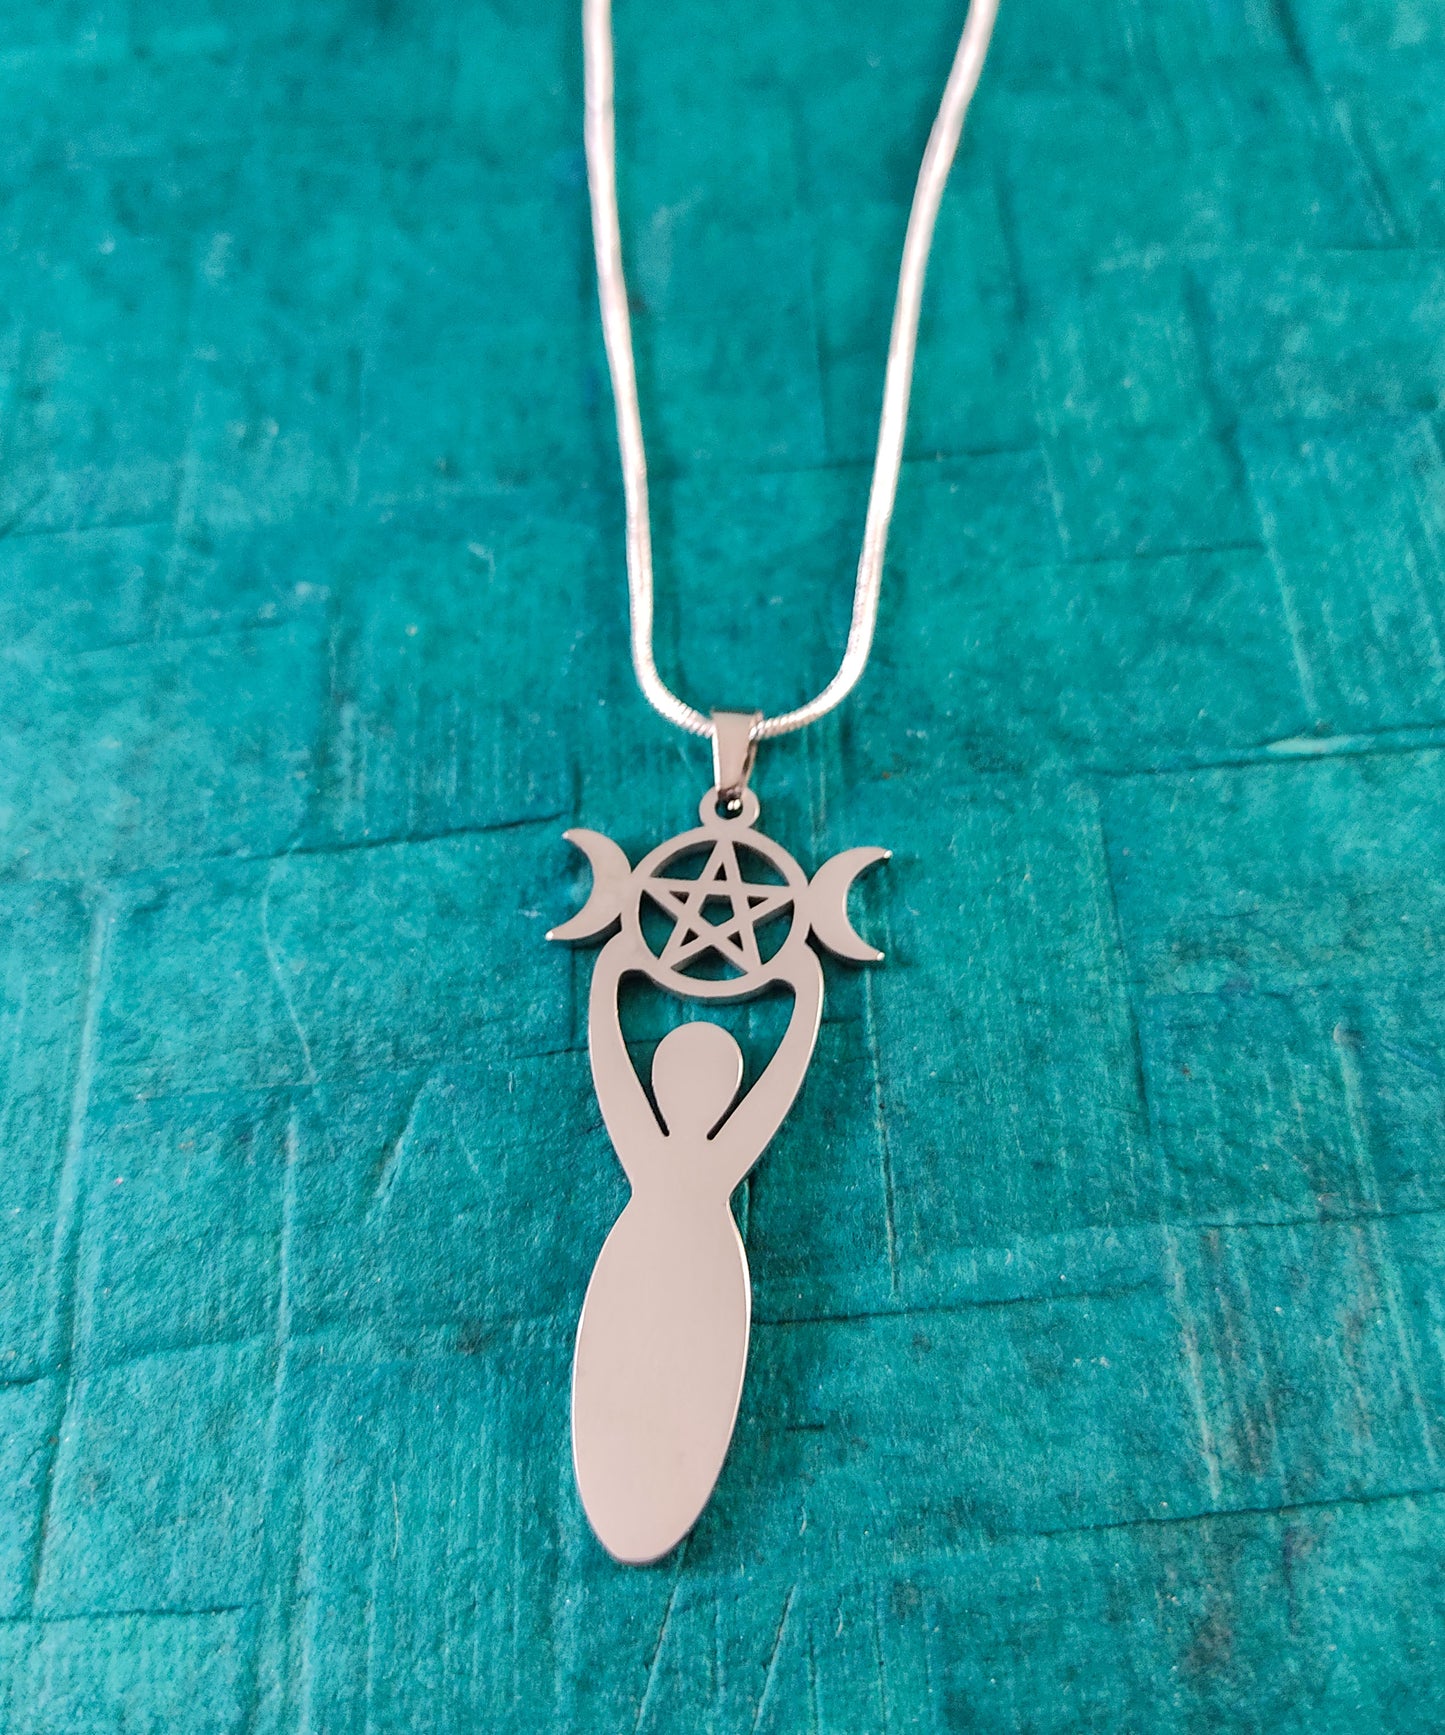 Triple Moon Goddess Witchcraft Pendant with 20" Silver Plated Snake Chain Necklace